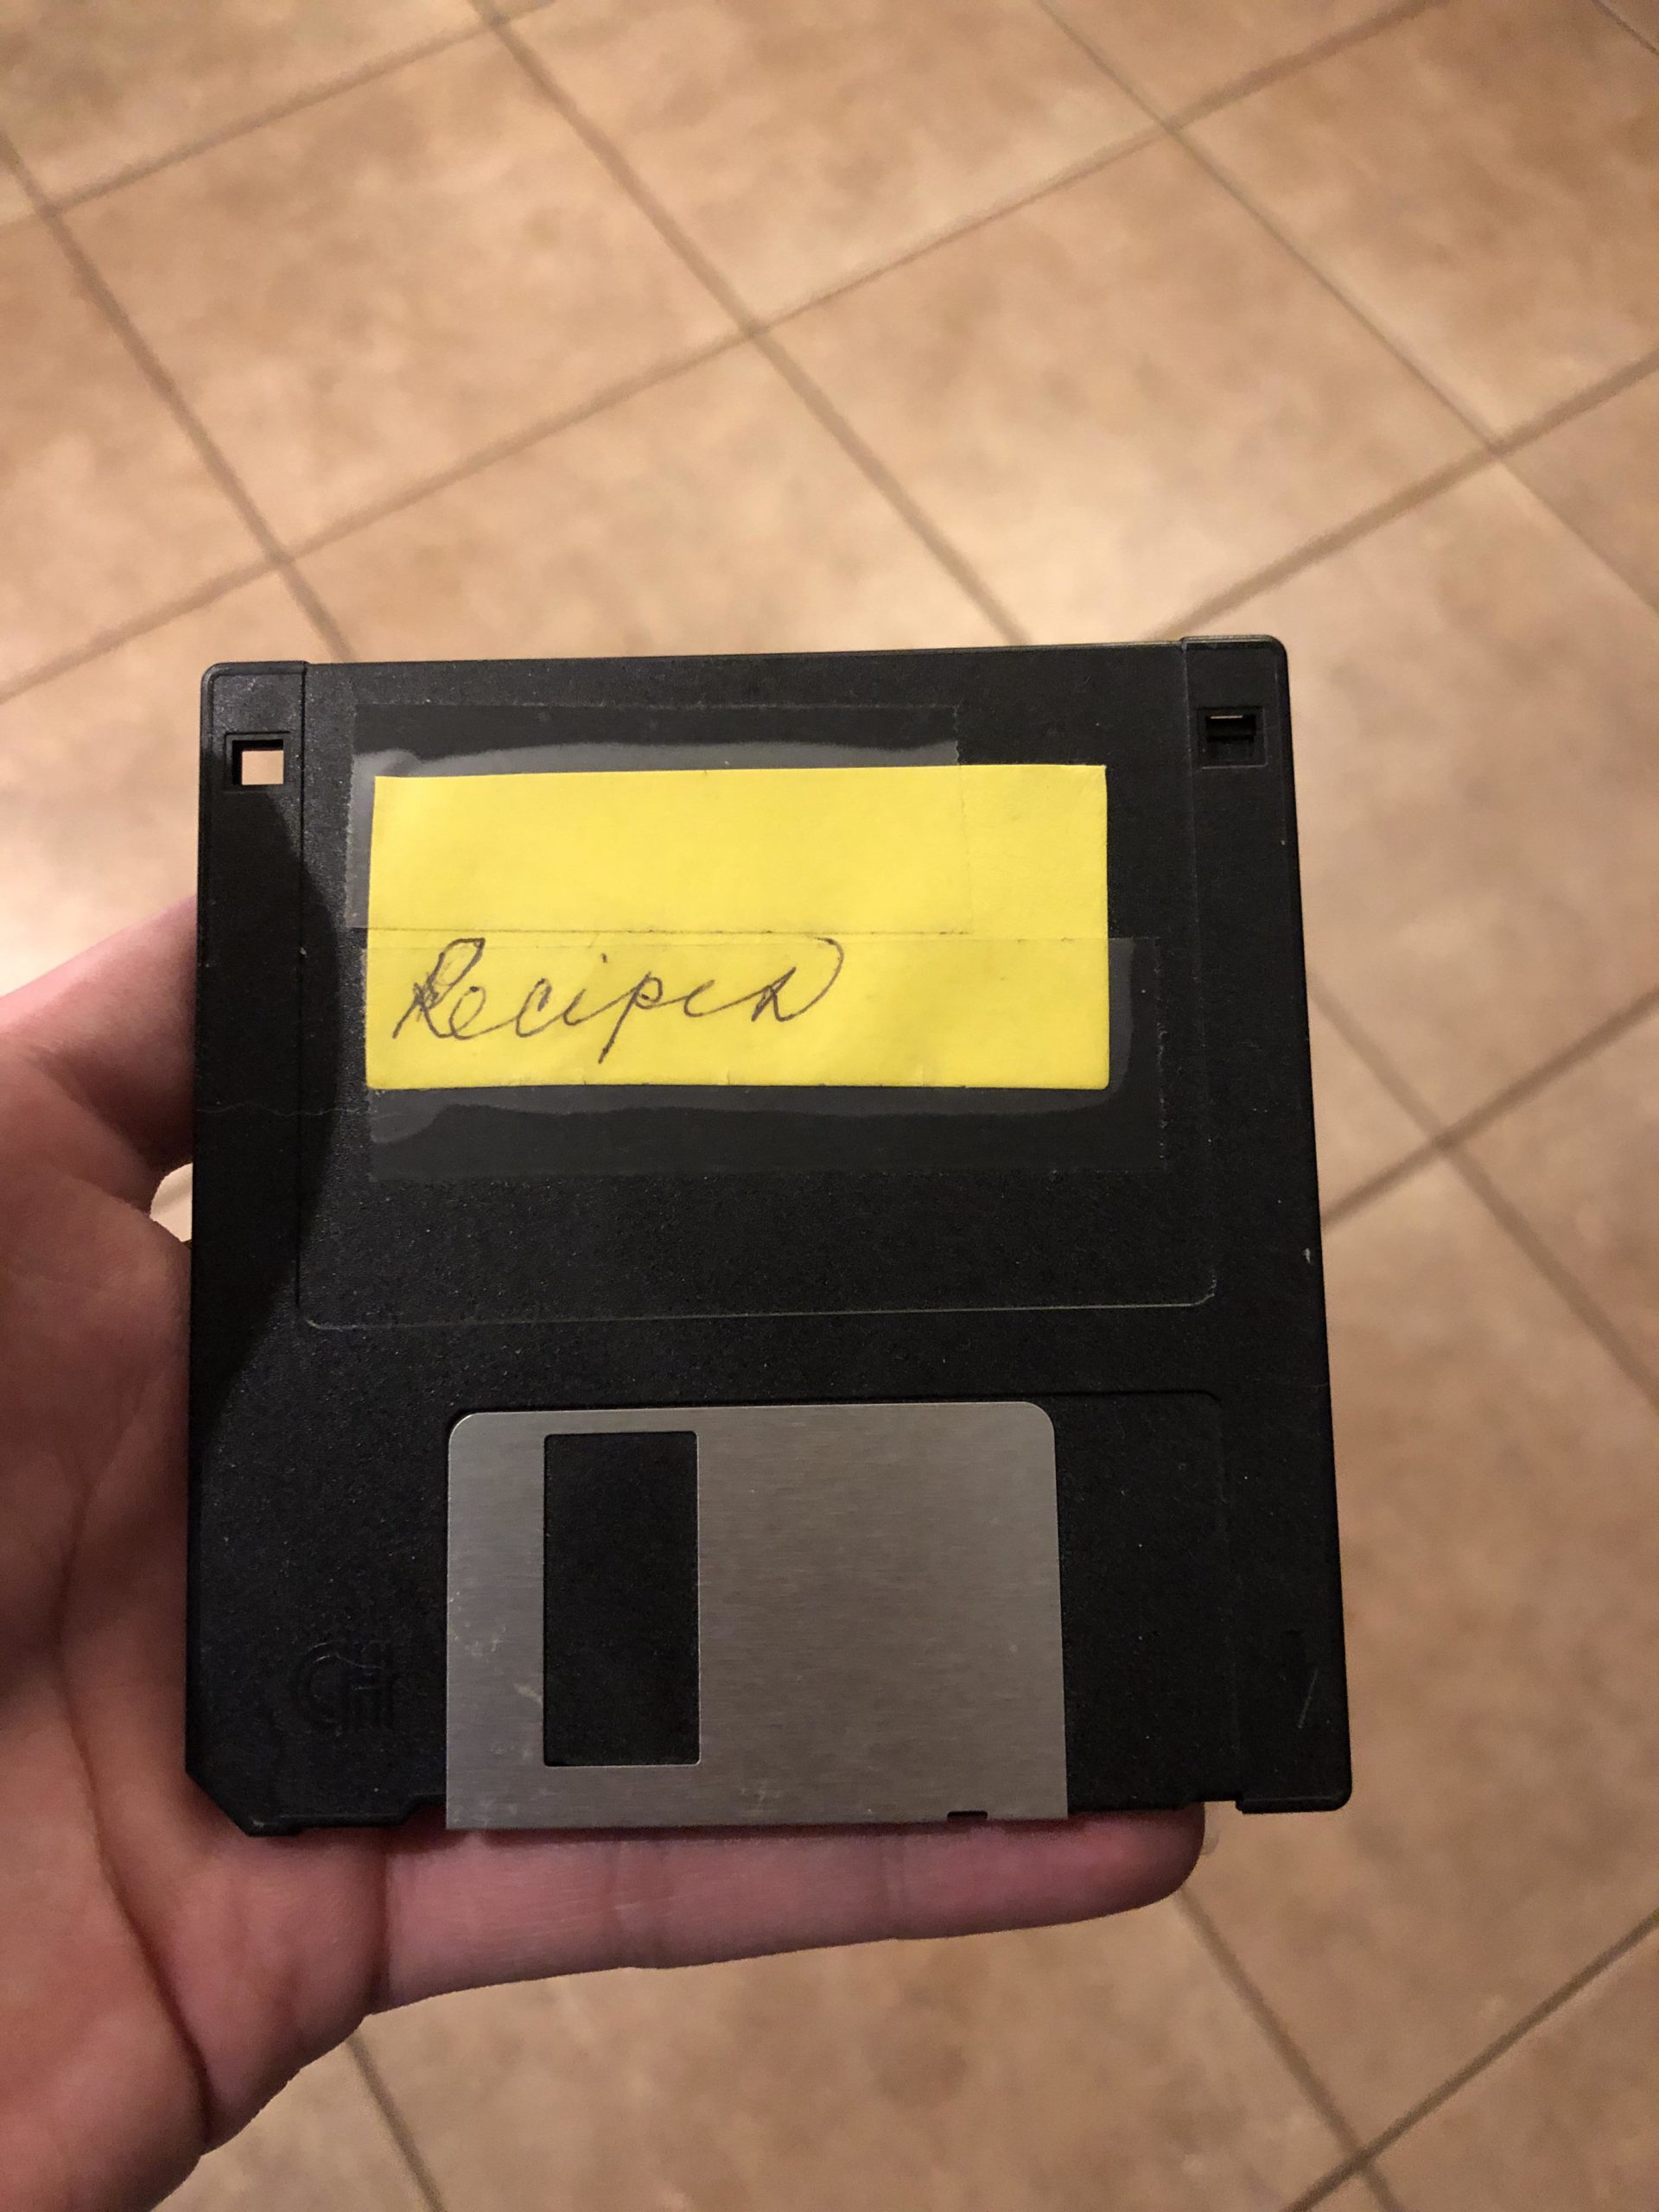 My+Grandmother+passed+down+her+recipes+on+a+floppy+disk